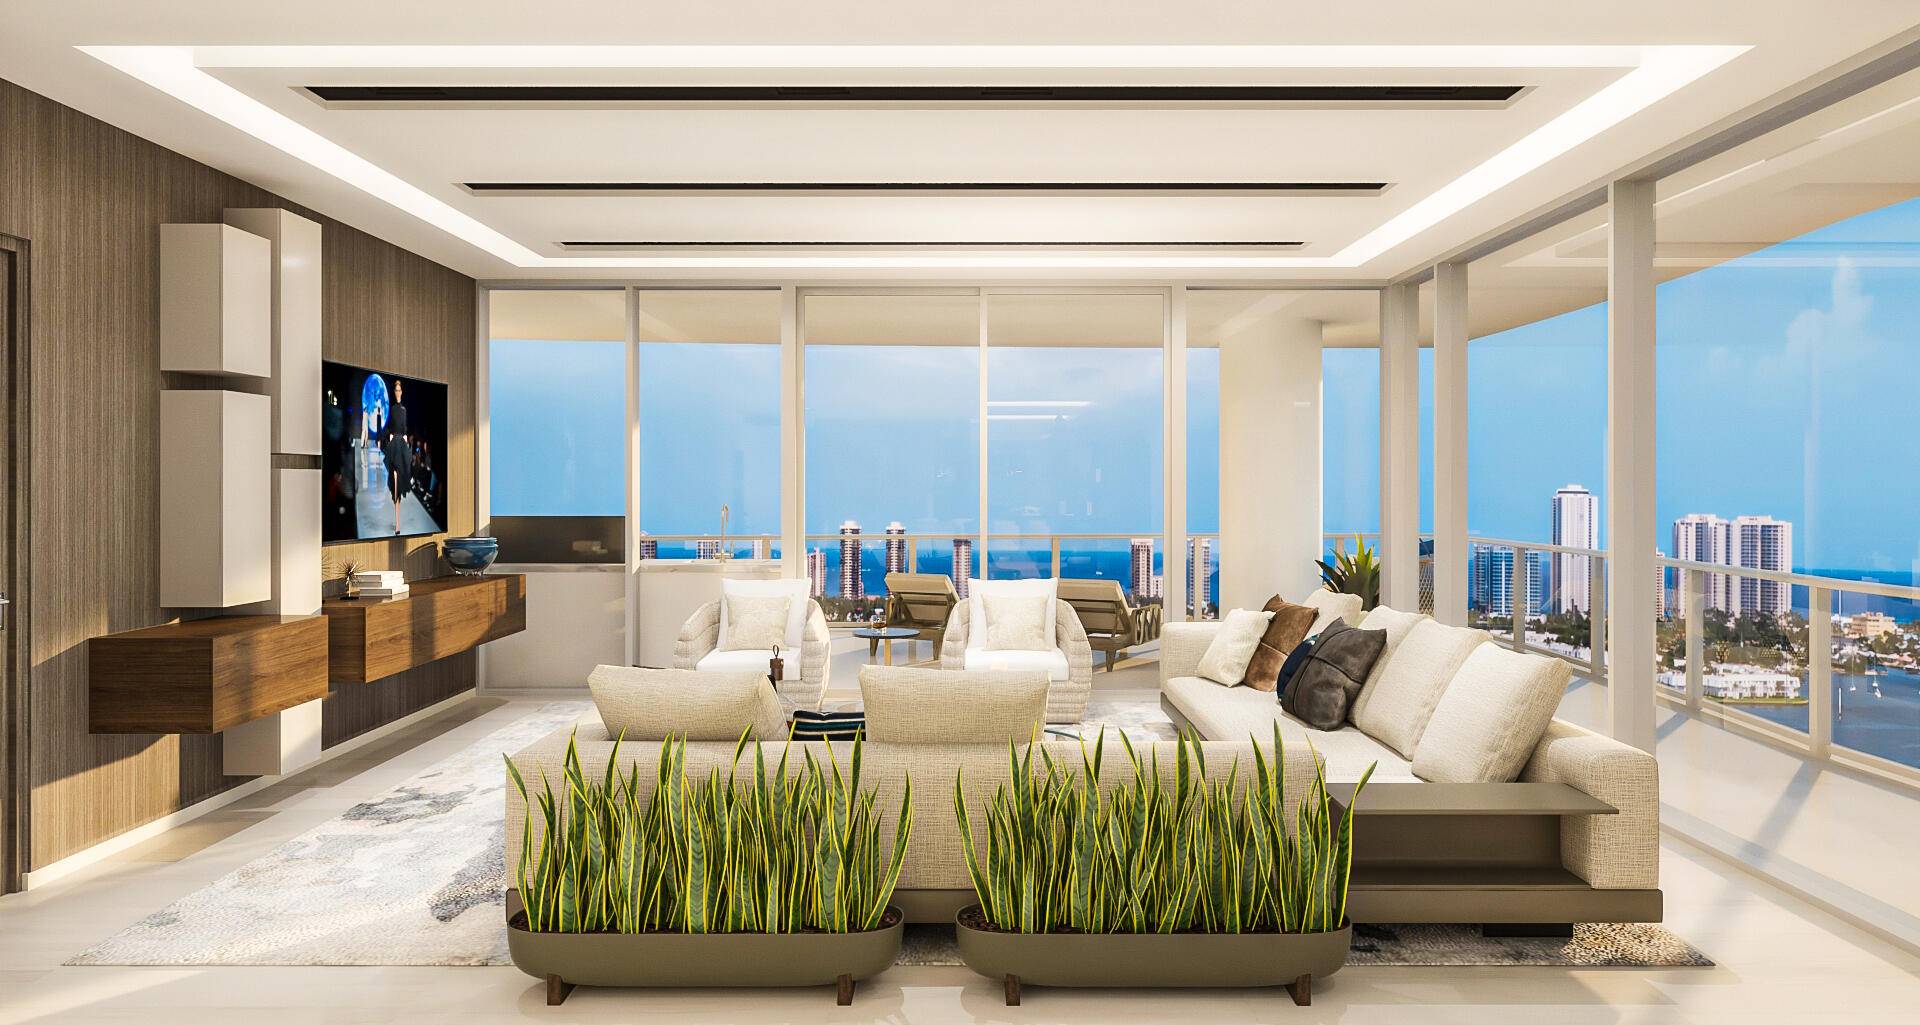 Nautilus 220 is a new luxe waterfront development under construction alongside a marina with 330 condominium residences in two, 24 storytowers, a one acre outdoor amenity deck, the SeaHawk Prime ...